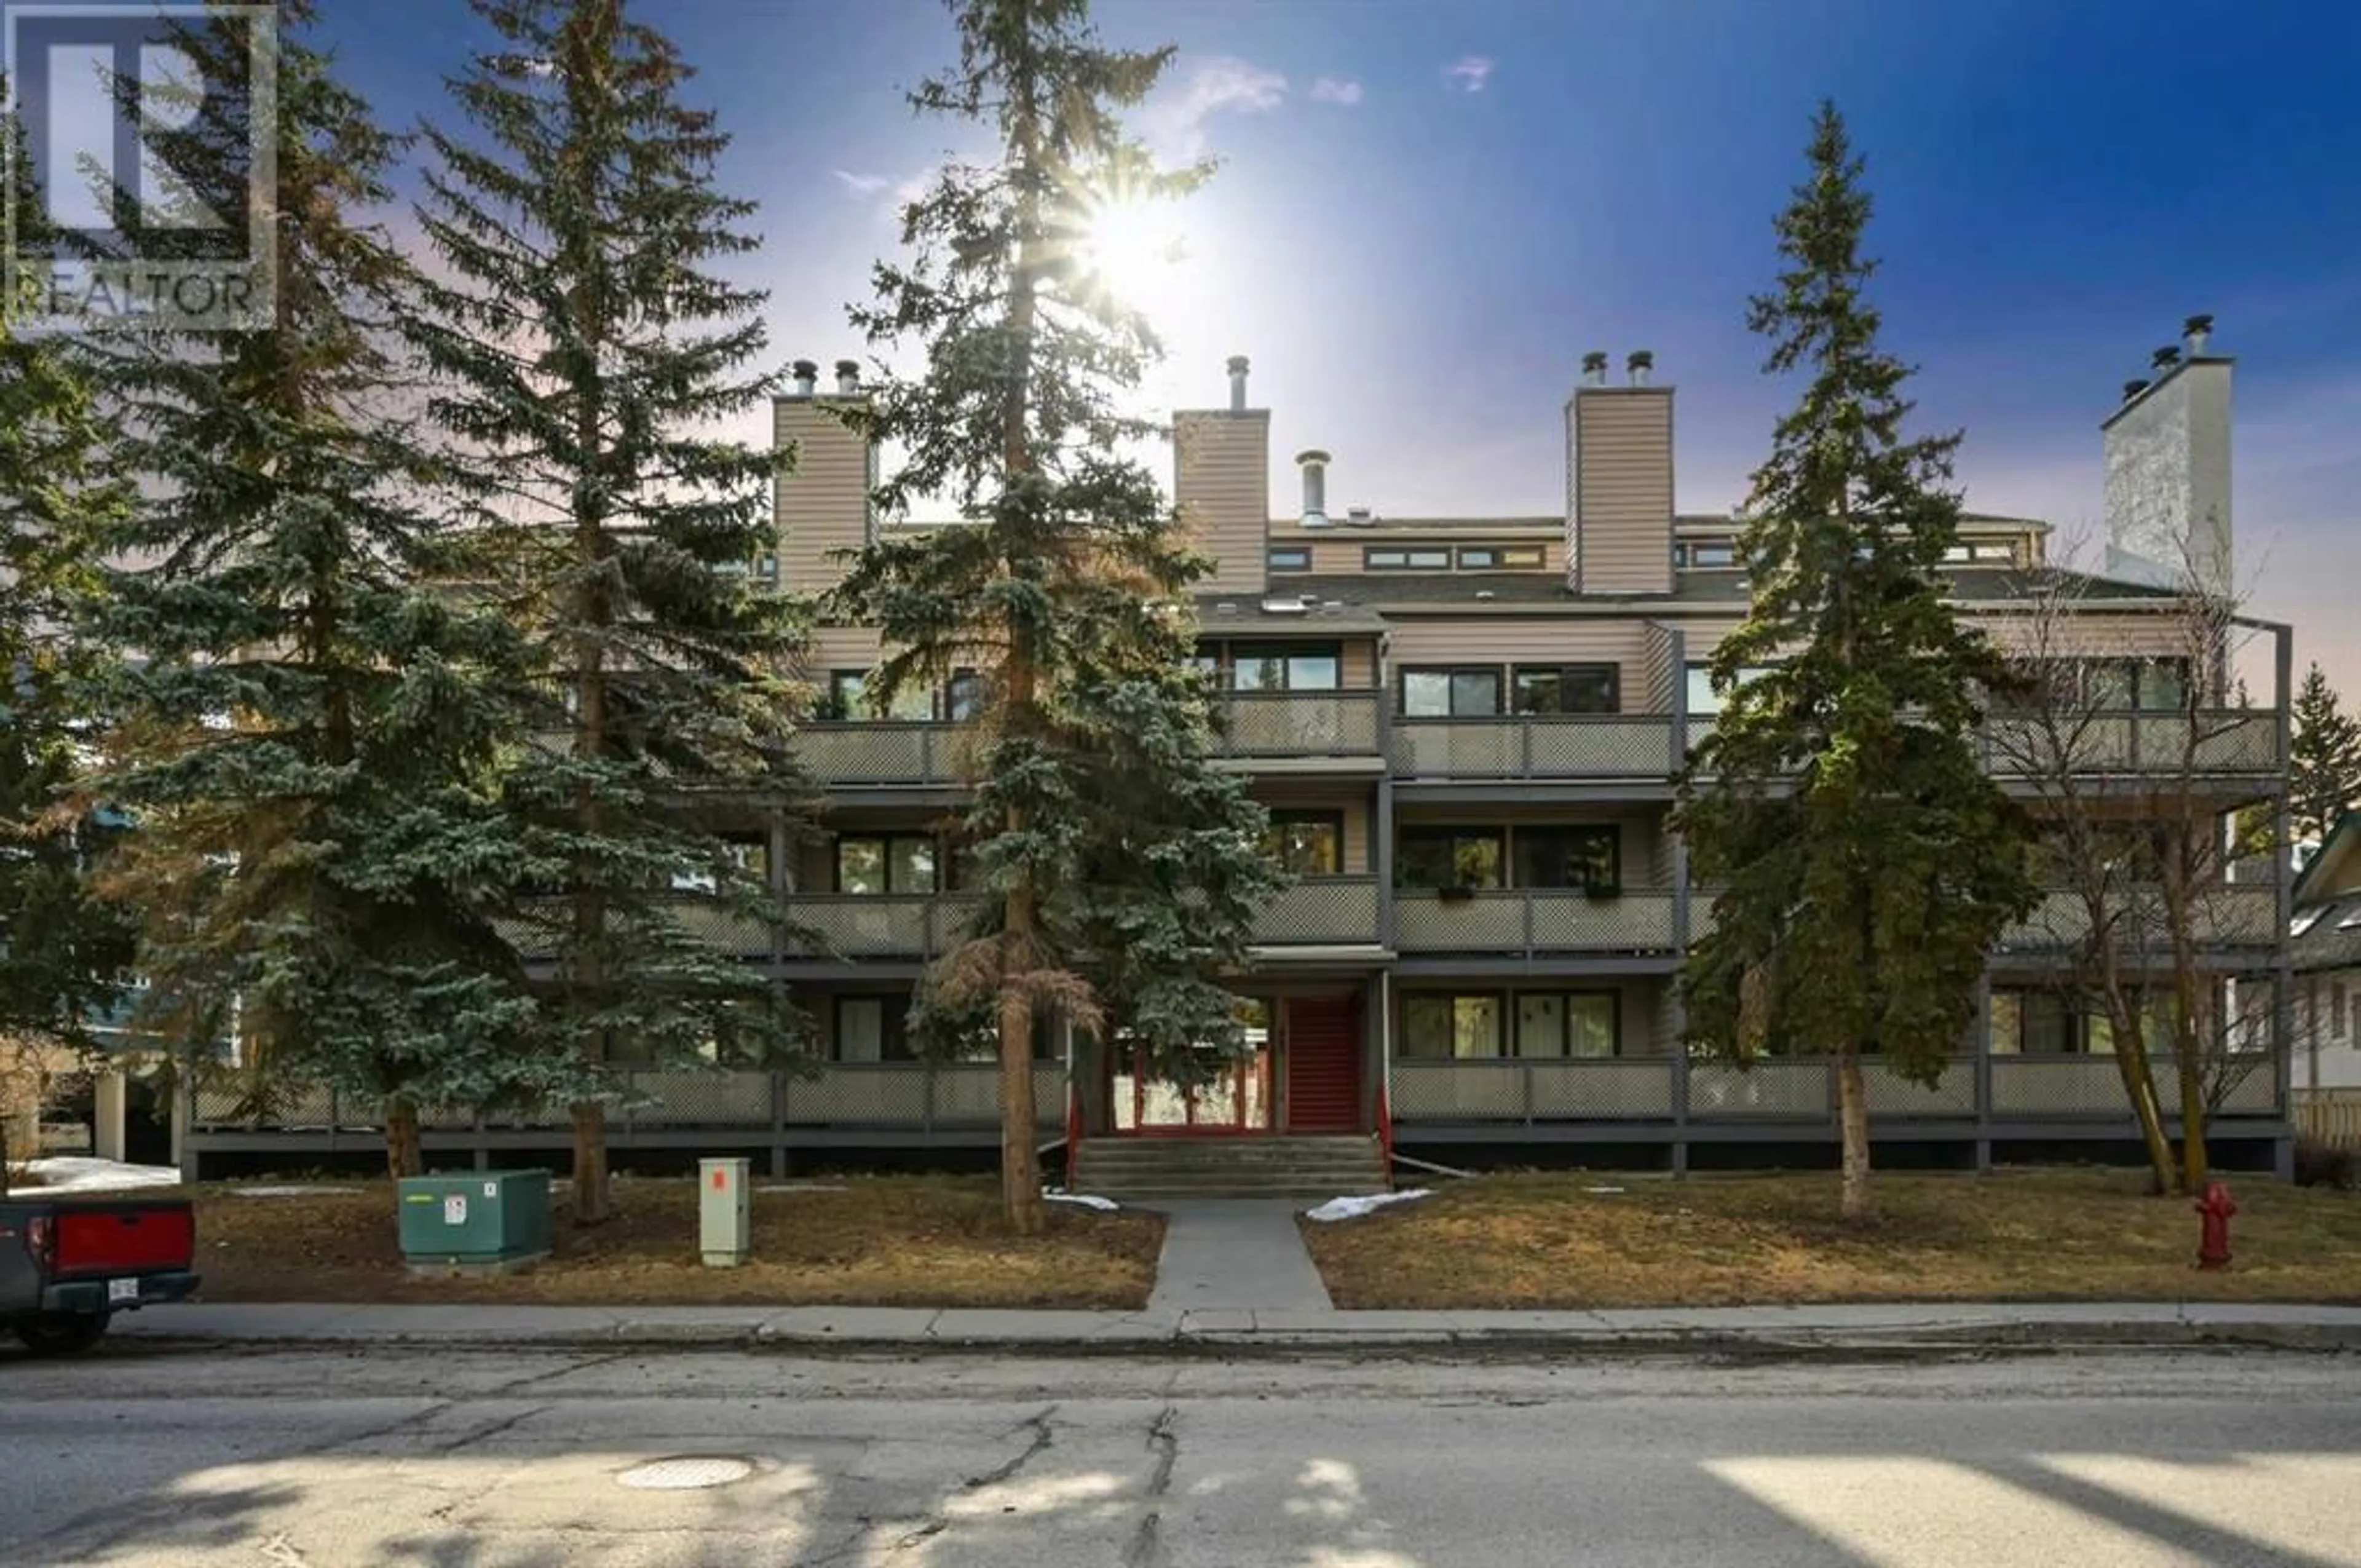 A pic from exterior of the house or condo for 213 414 Squirrel Street, Banff Alberta T1L1H1